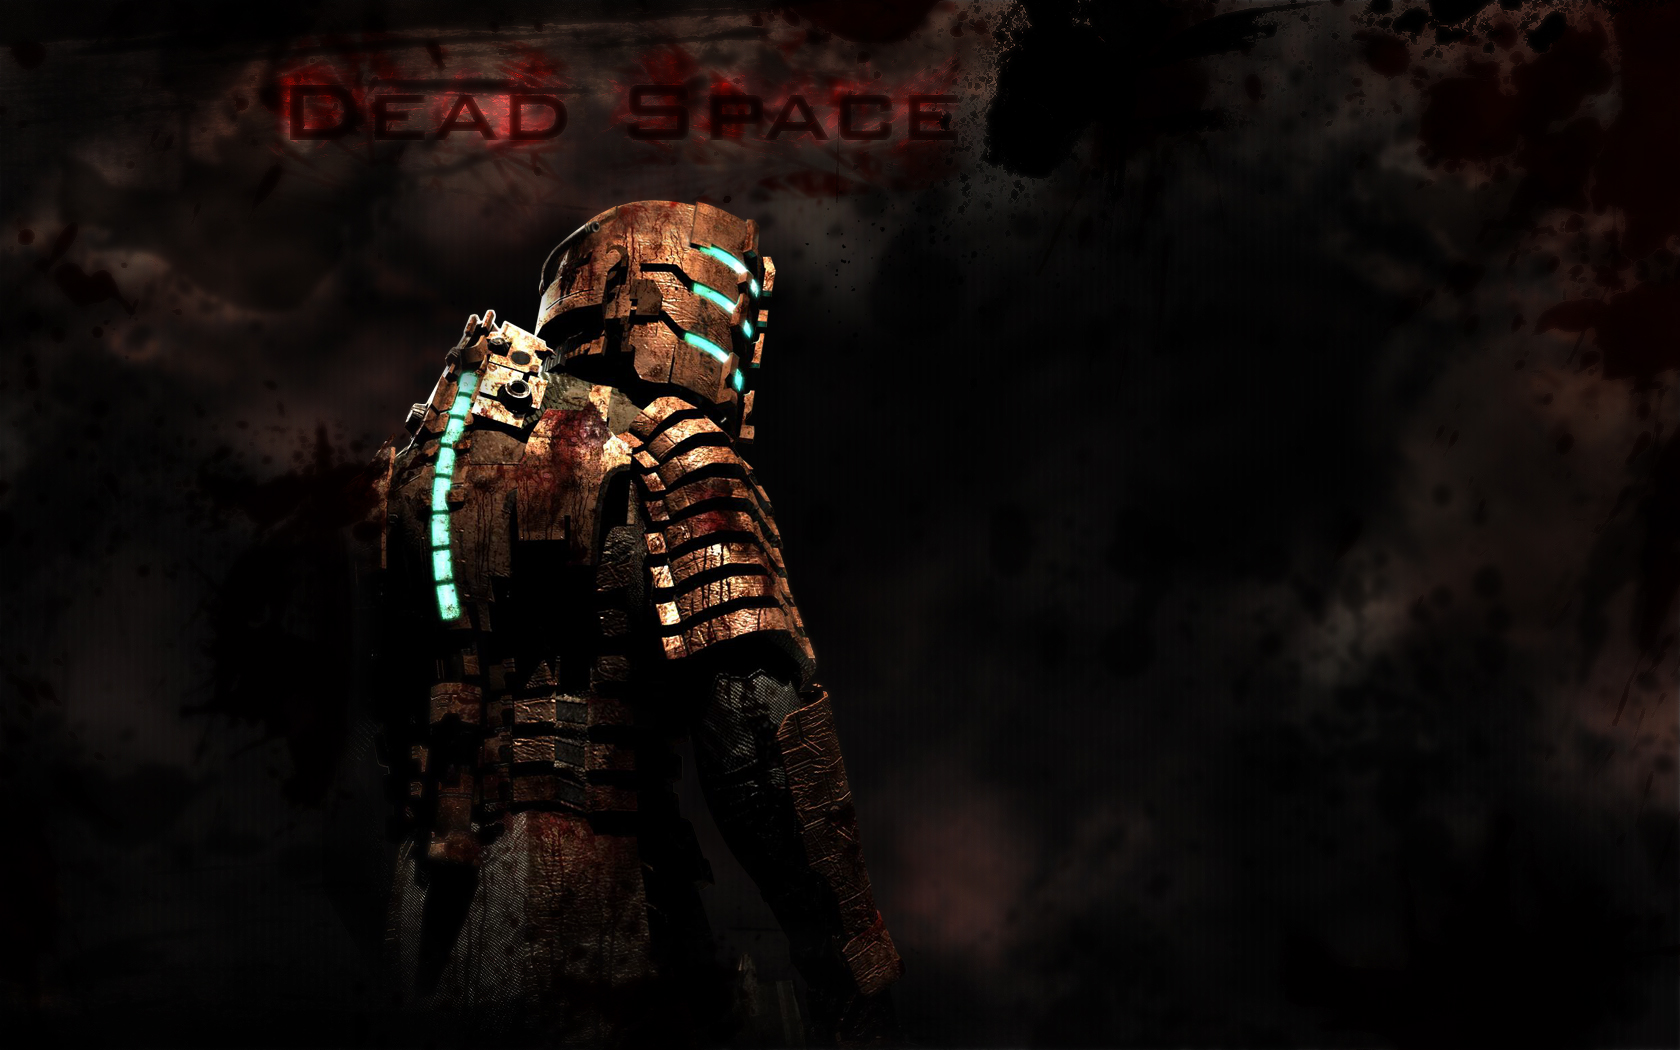 Download wallpaper for 2560x1440 resolution | Dead Space HD | games